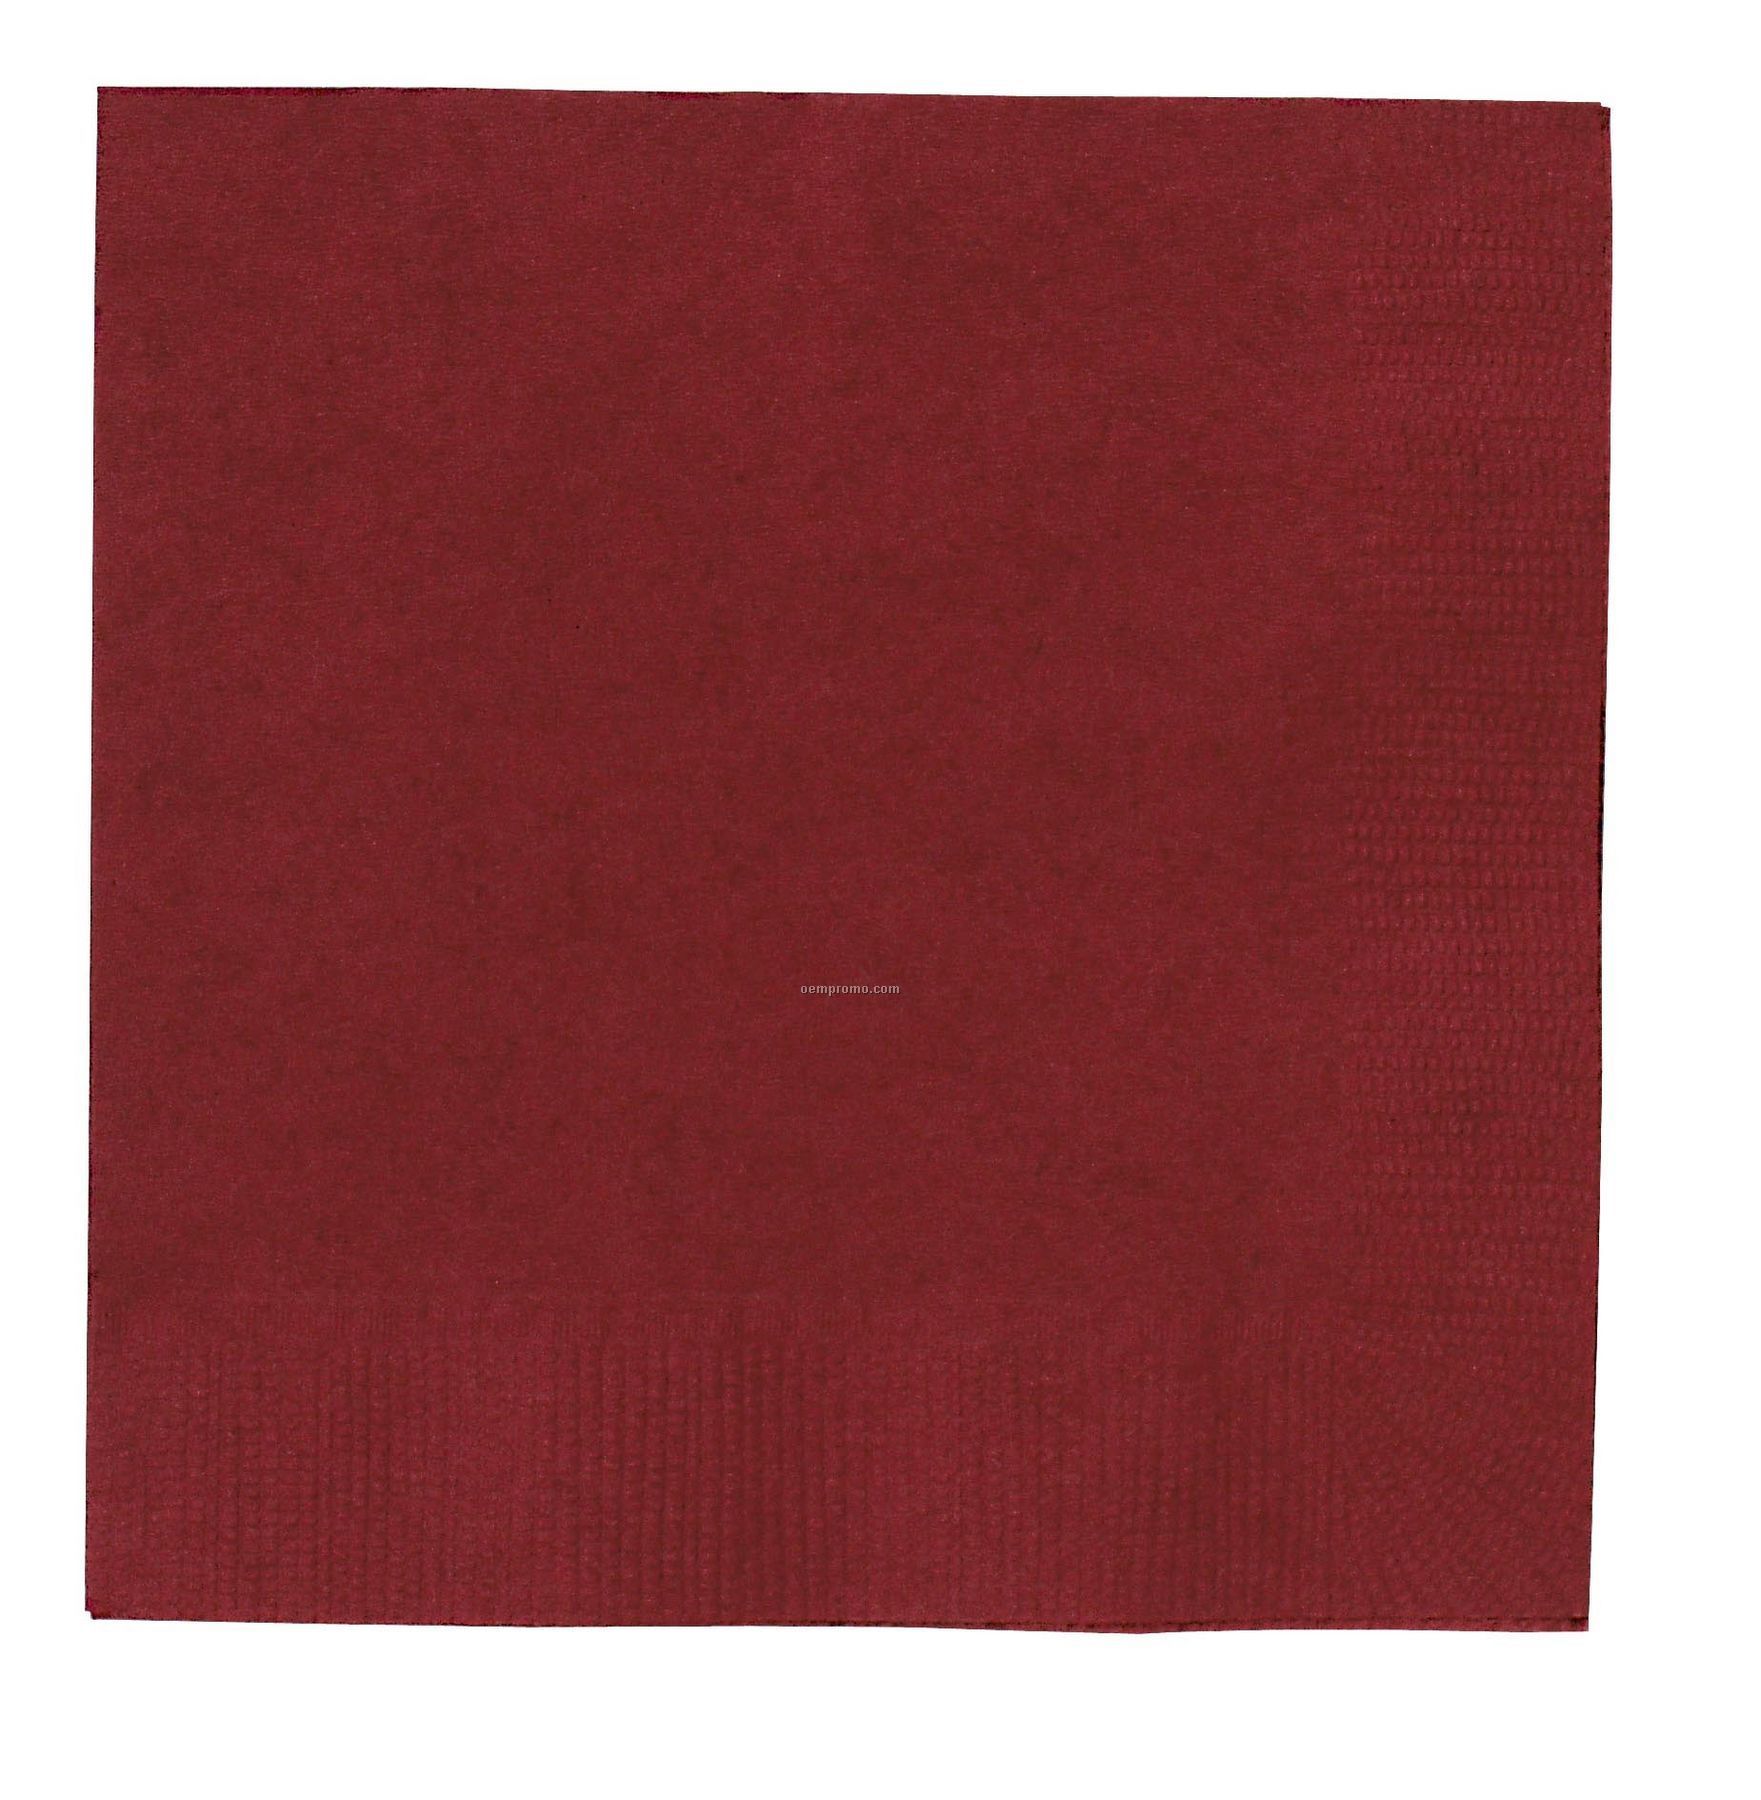 Colorware Burgundy Royale Red Dinner Napkins With 1/4 Fold